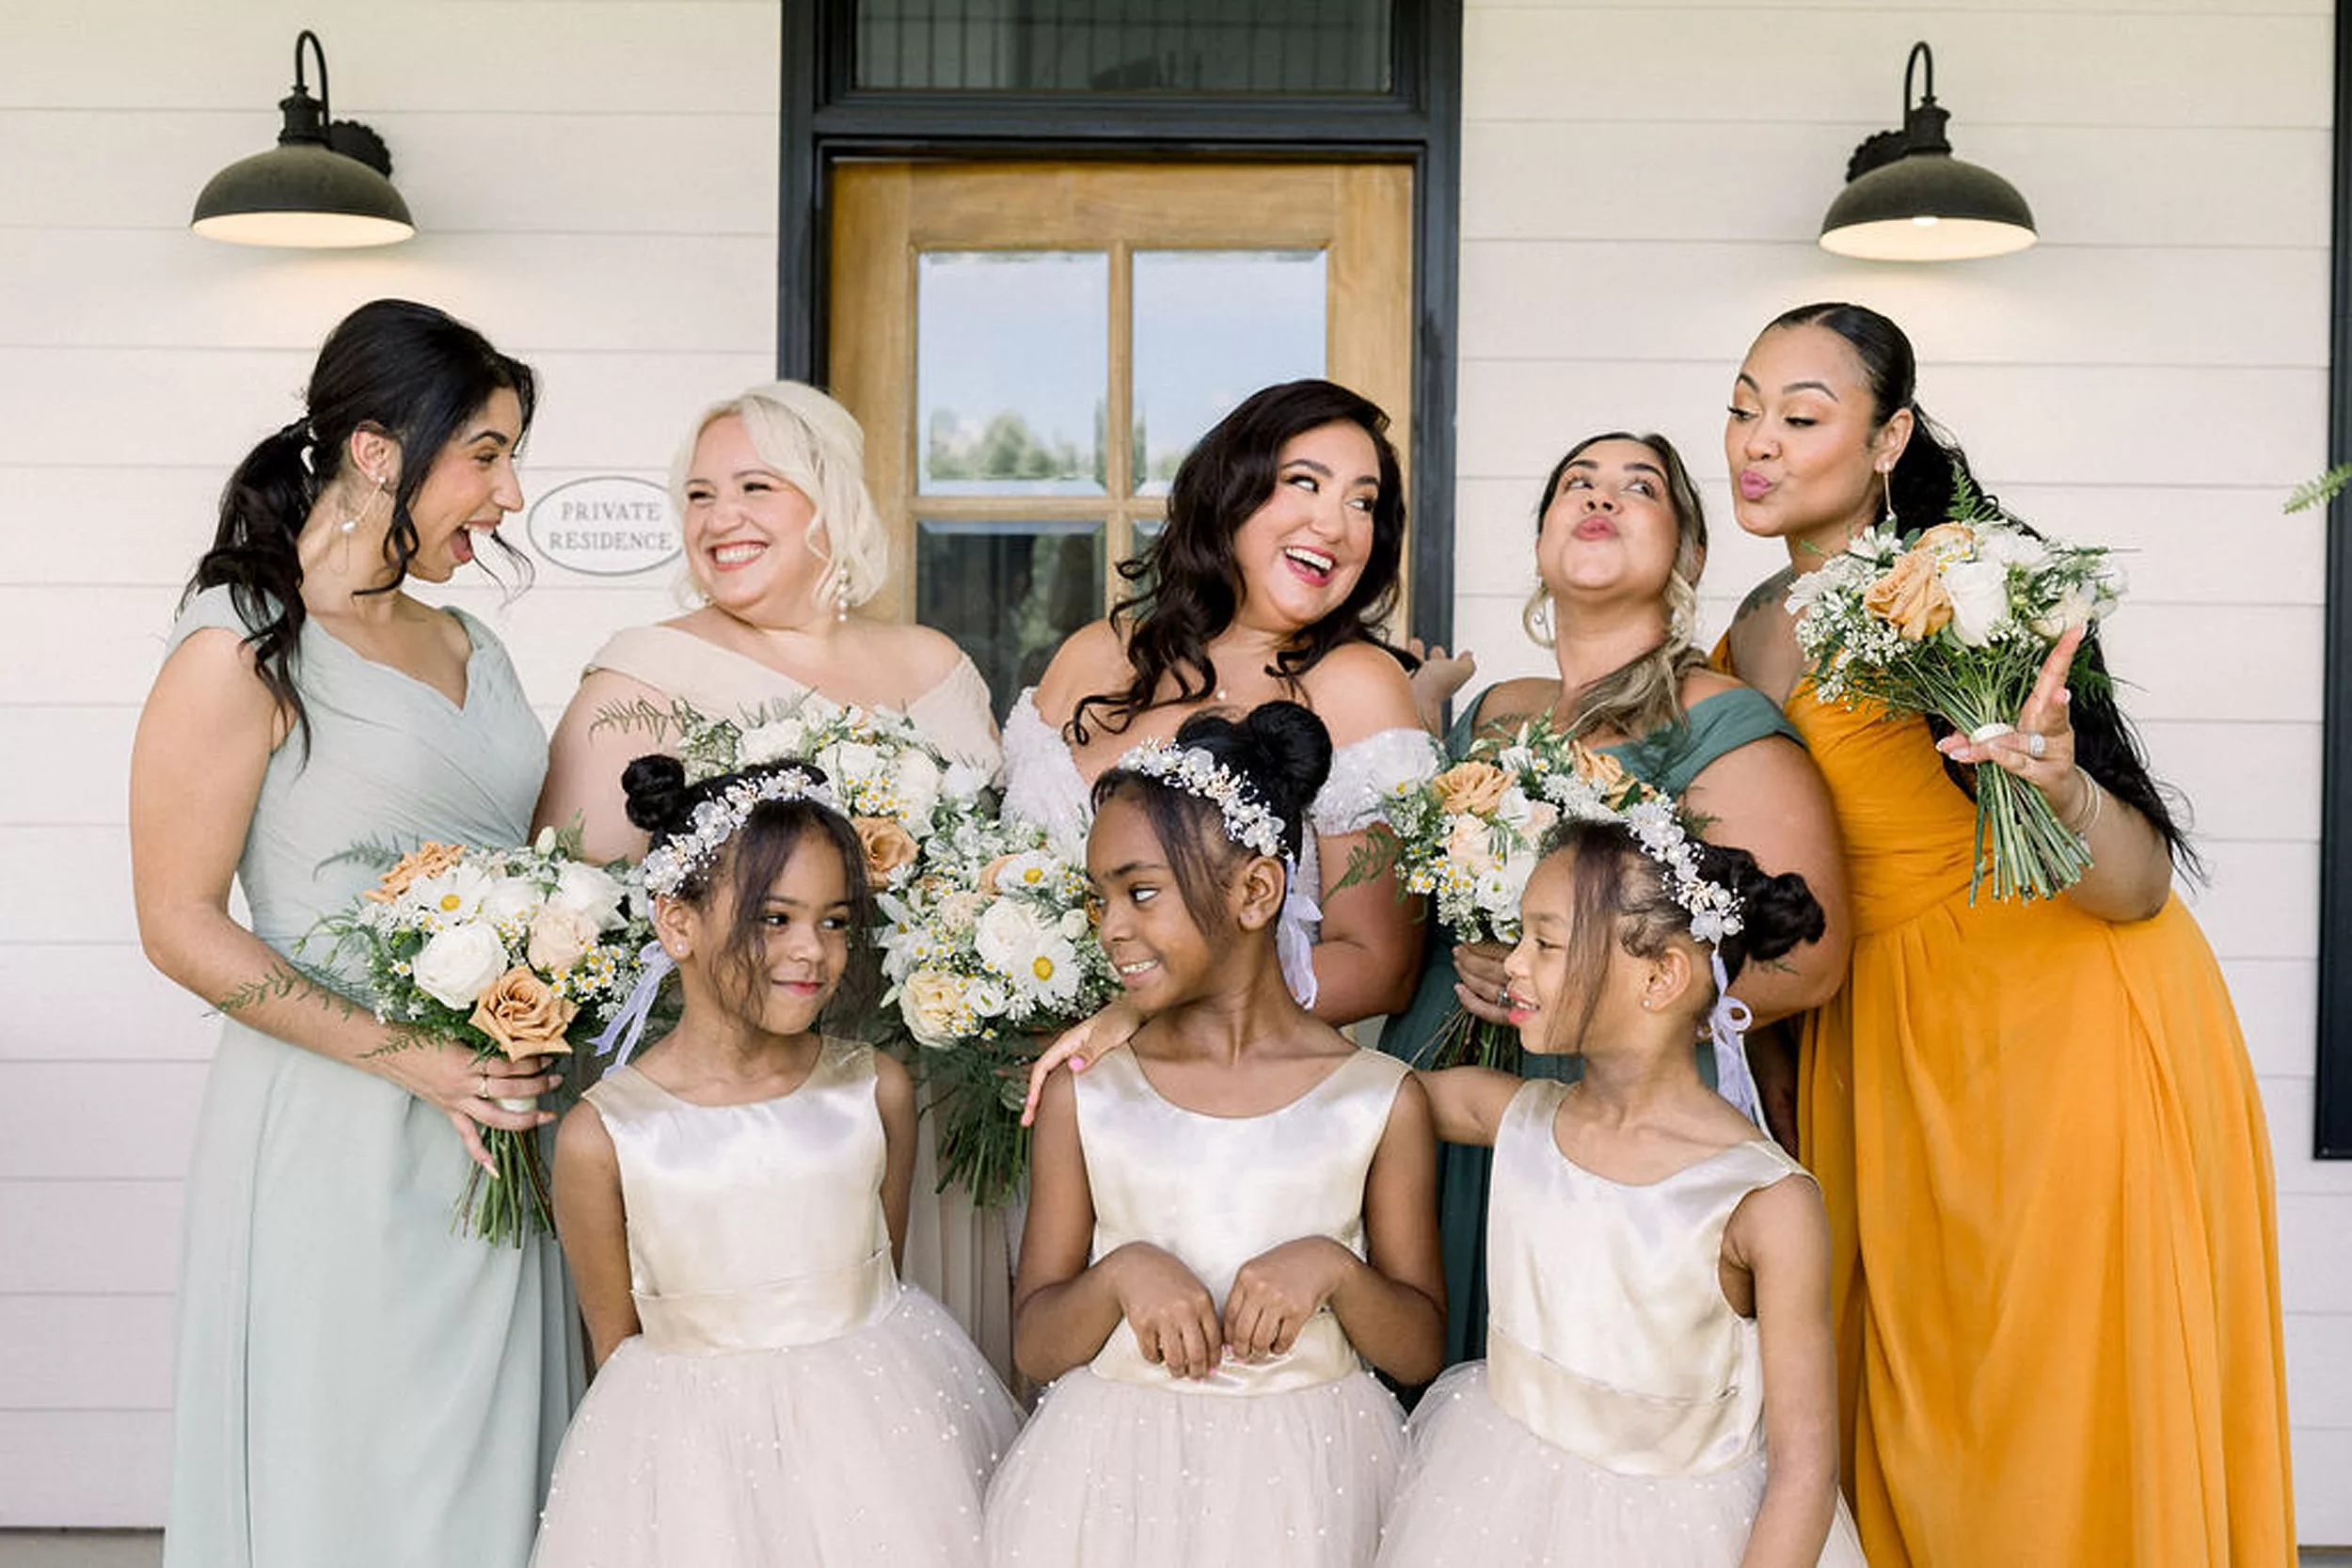 A bride laughs and plays with her bridesmaids and four flower girls while standing on a porch